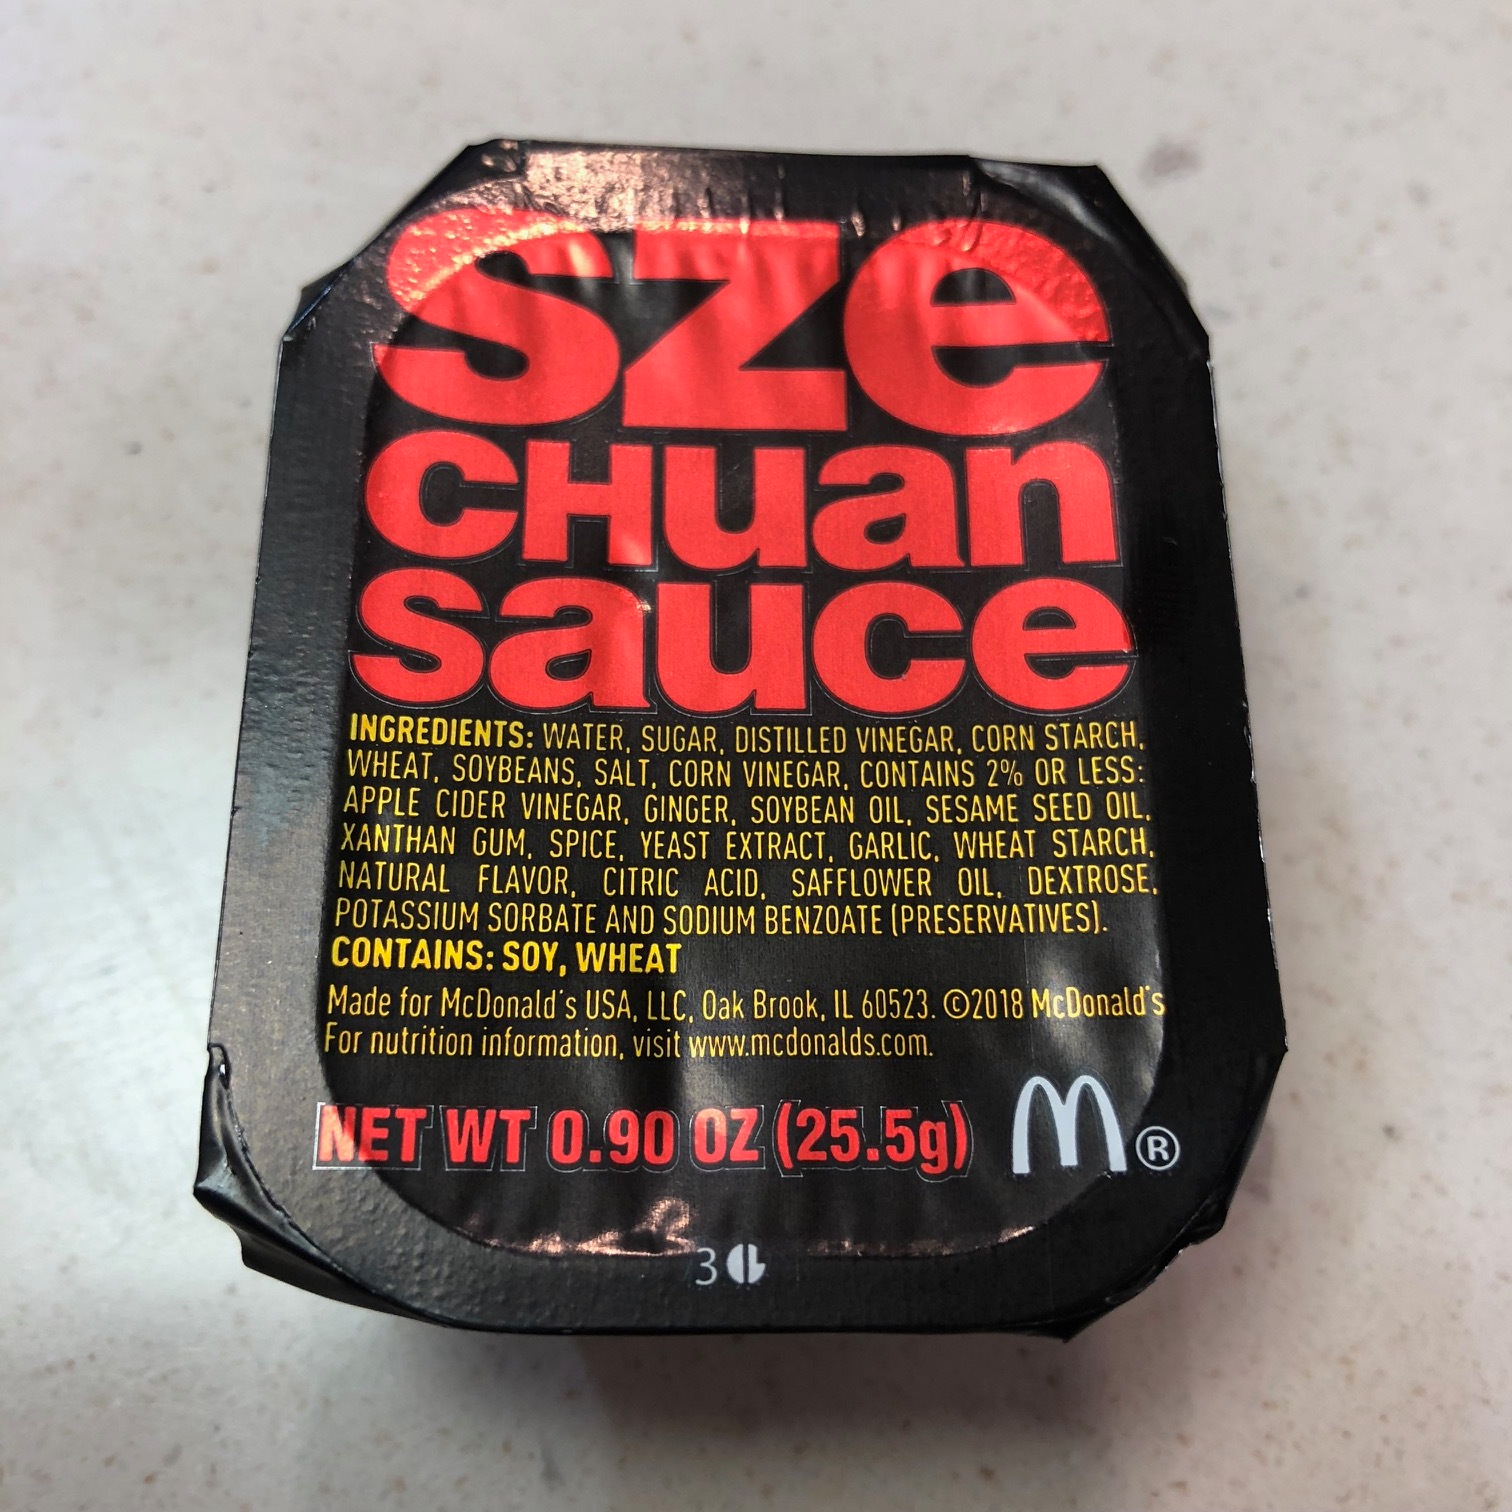 Amazon really lets you ship yourself Szechuan Sauce because we live in a cruel universe.</br></br>Buy some <a href=https://amzn.to/2uT2lTV "nofollow" target="_blank">here.</a>